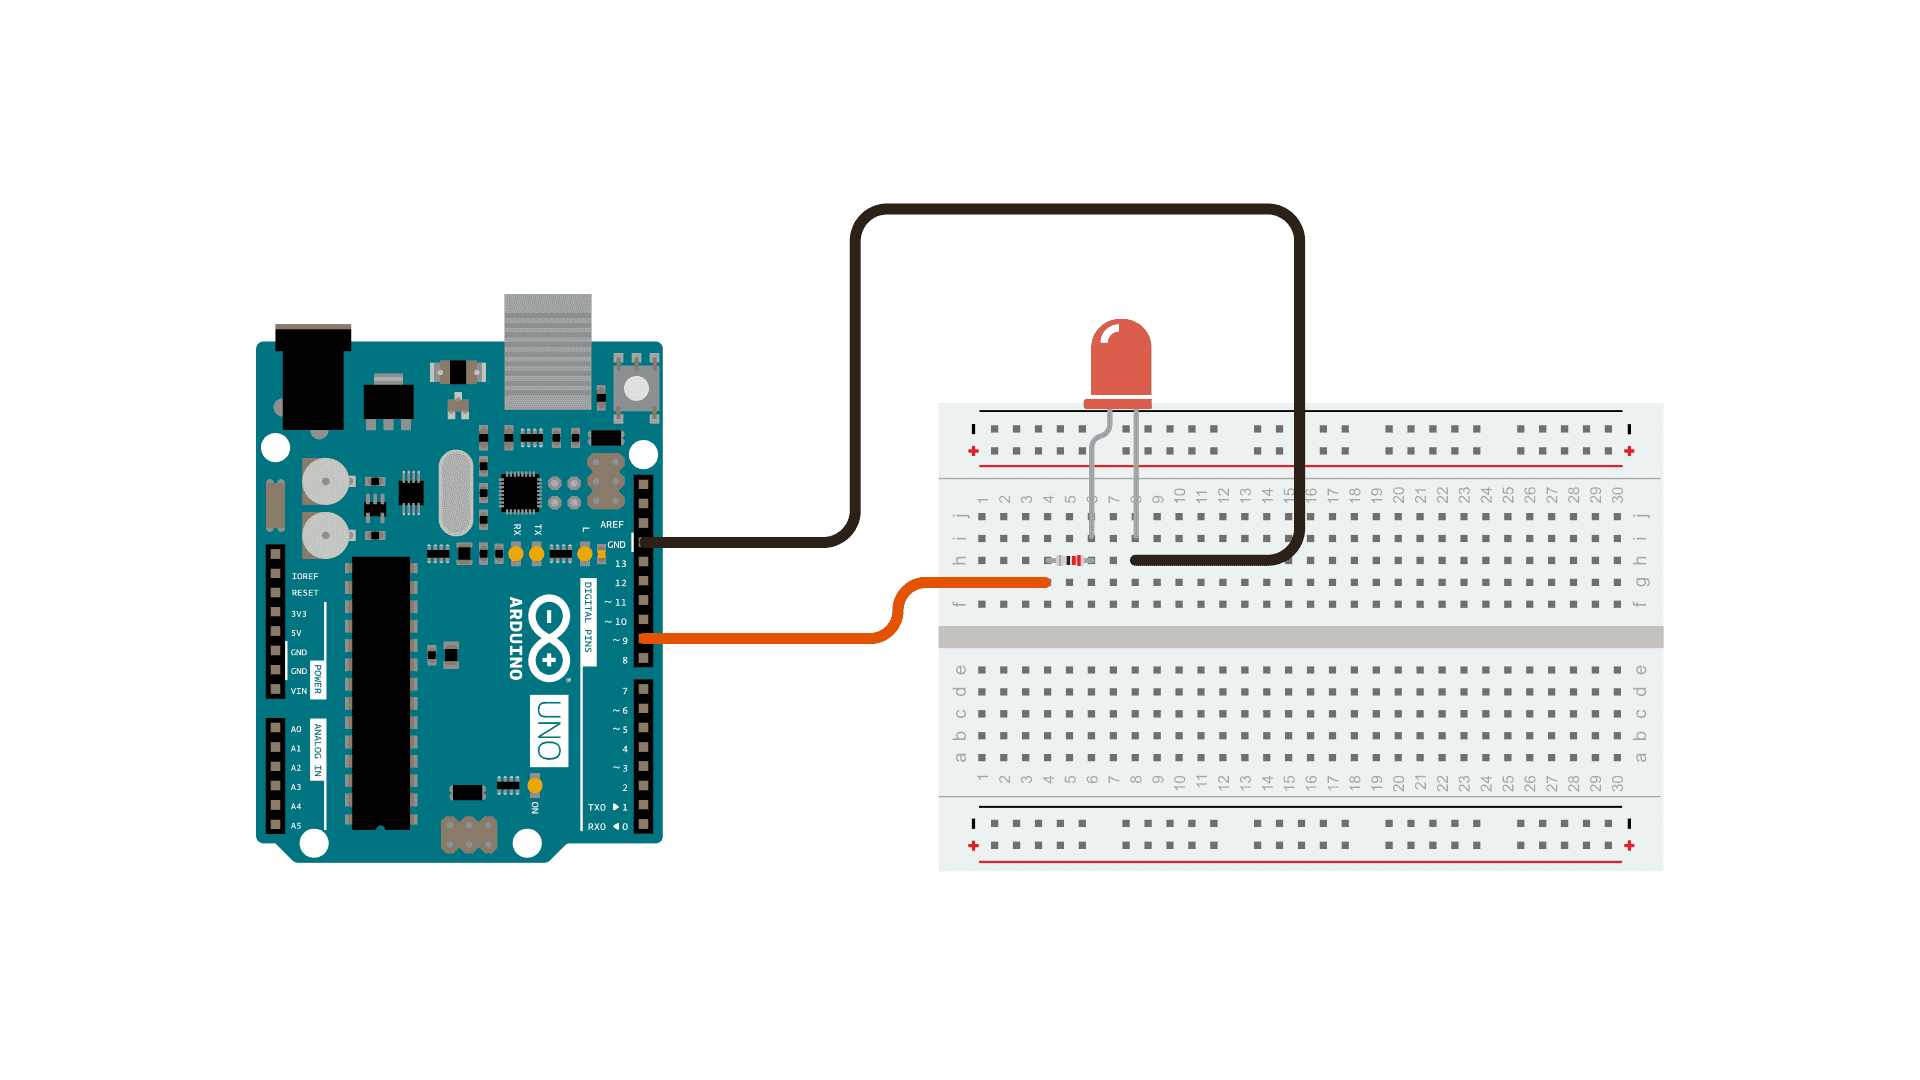 Project: Multiple LEDs on a Breadboard - Learn by Digital Harbor Foundation